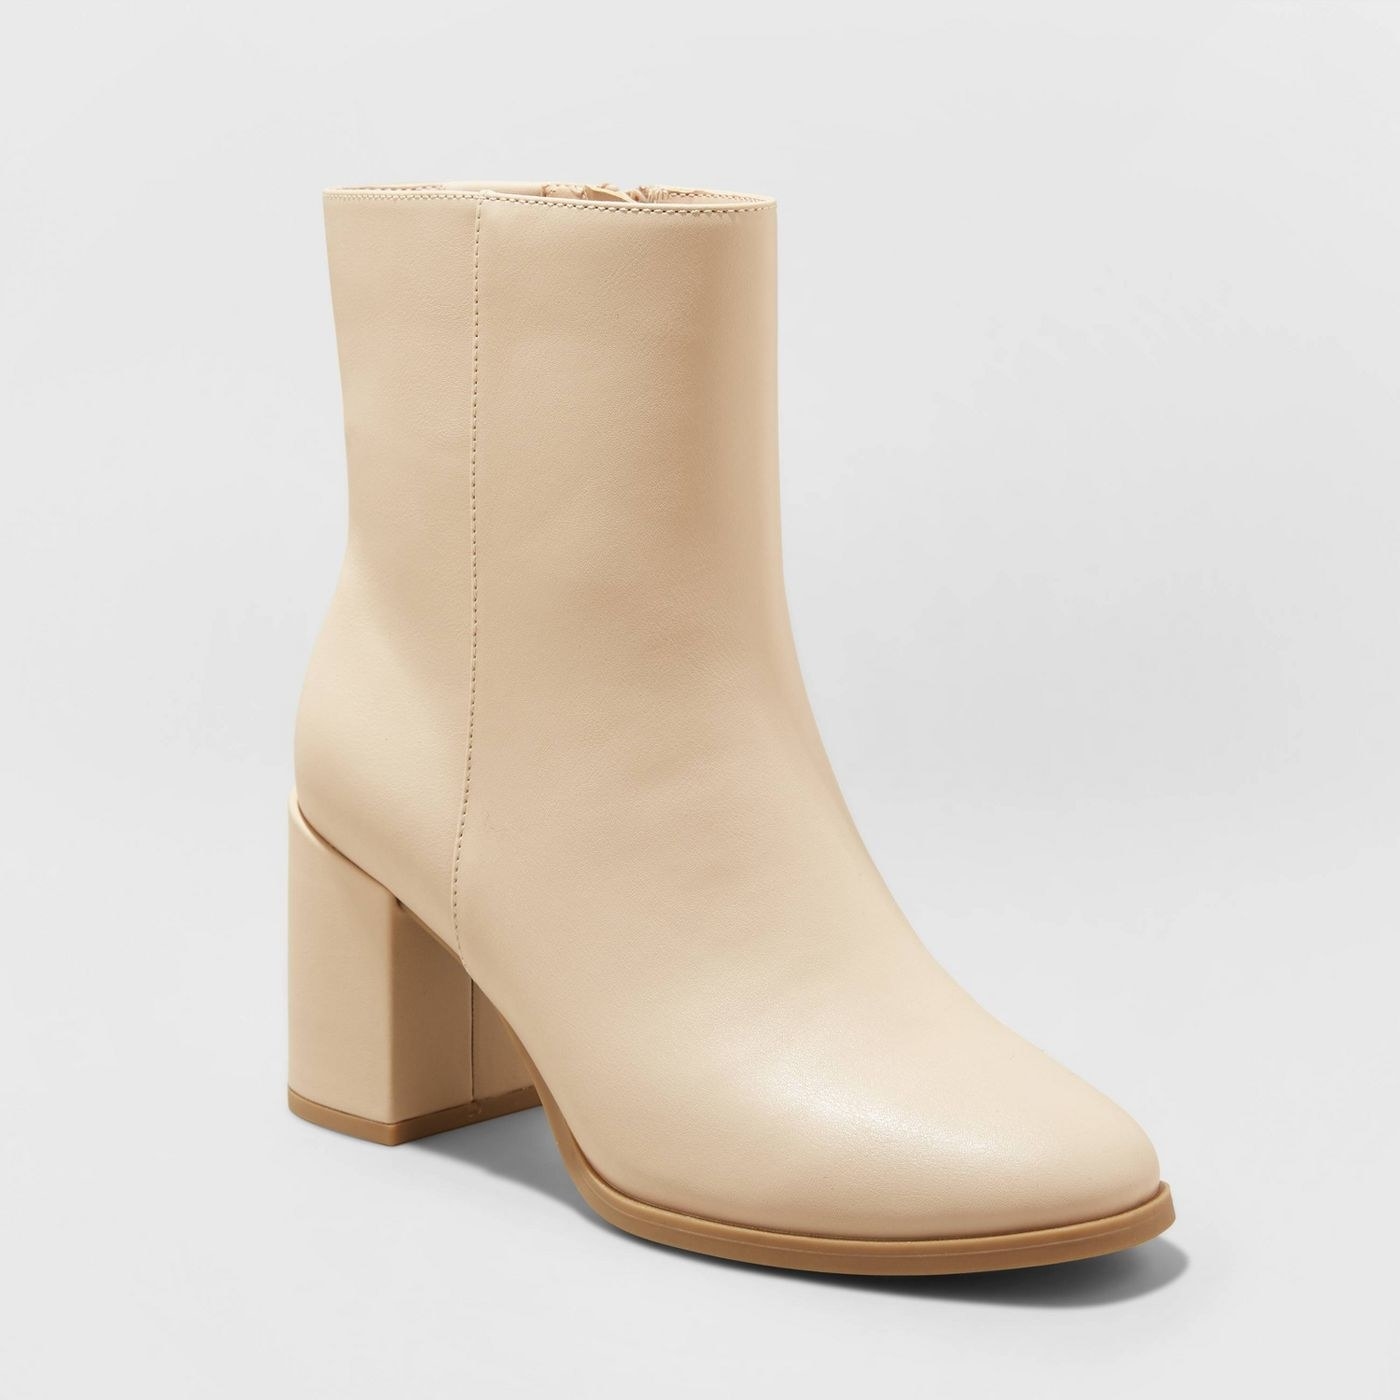 A taupe ankle boot